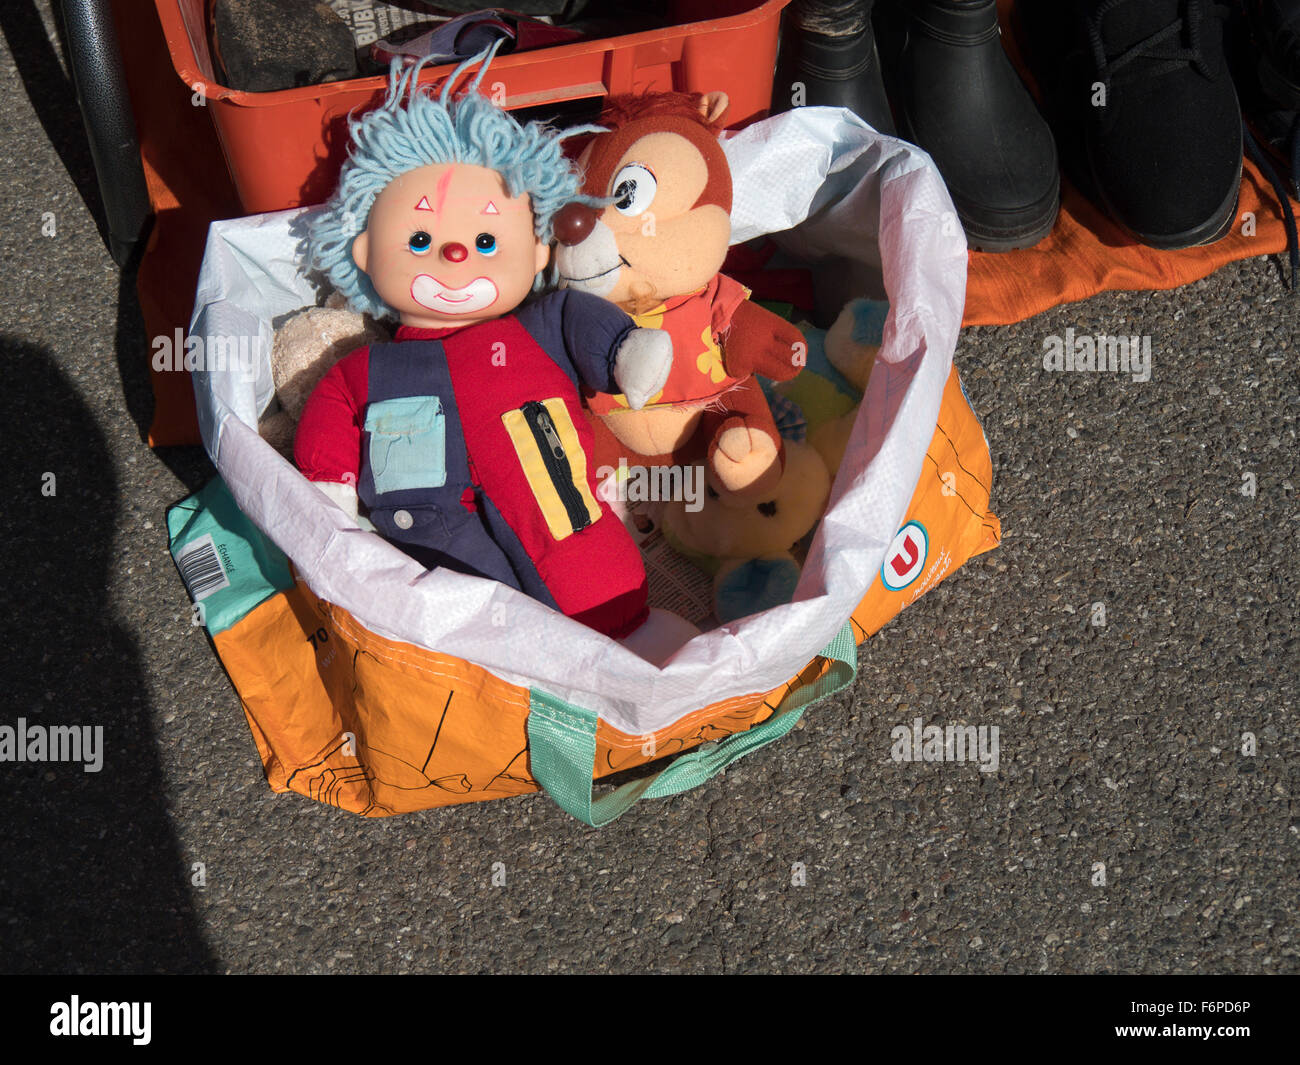 Loveable soft toys for sale at a car boot fair in London, England Stock Photo